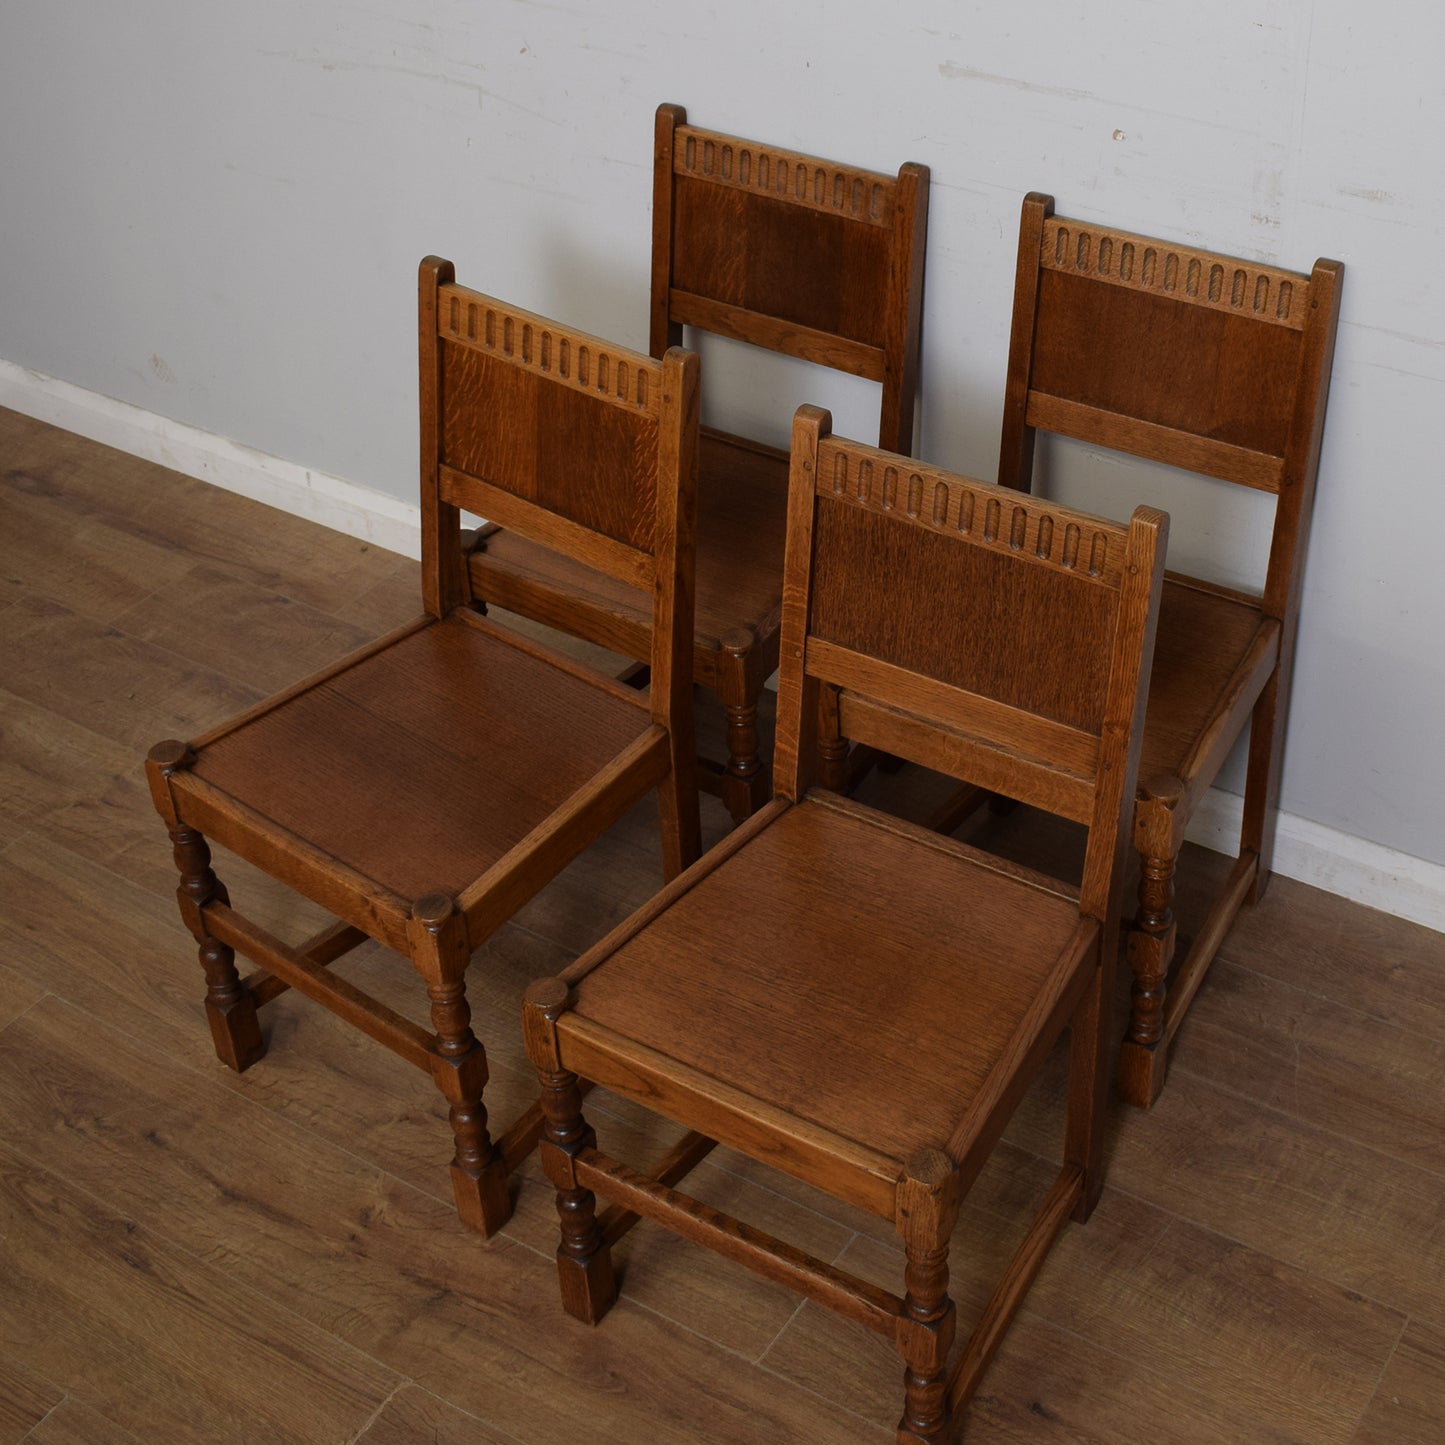 Extending Draw Leaf Table & Four Chairs